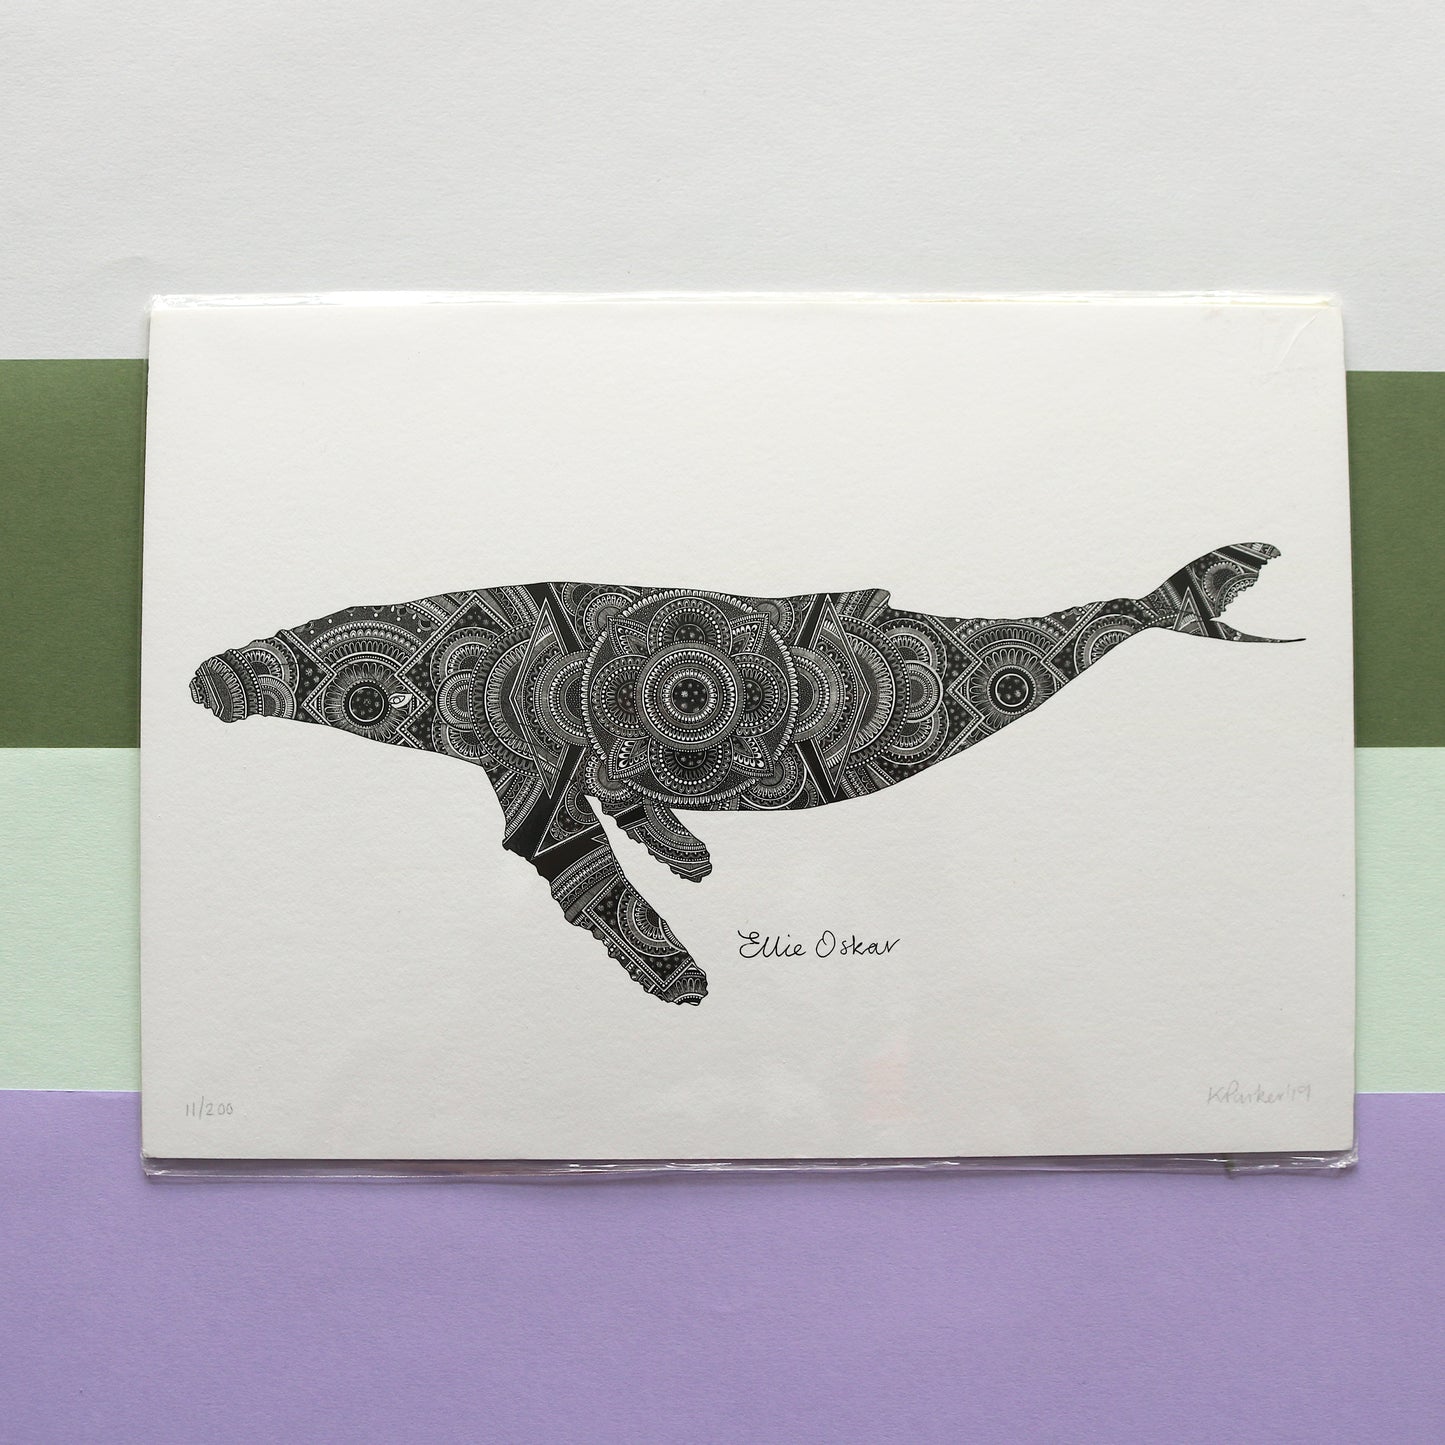 SALE - A4 Whale Print **Old Branding** 2 available